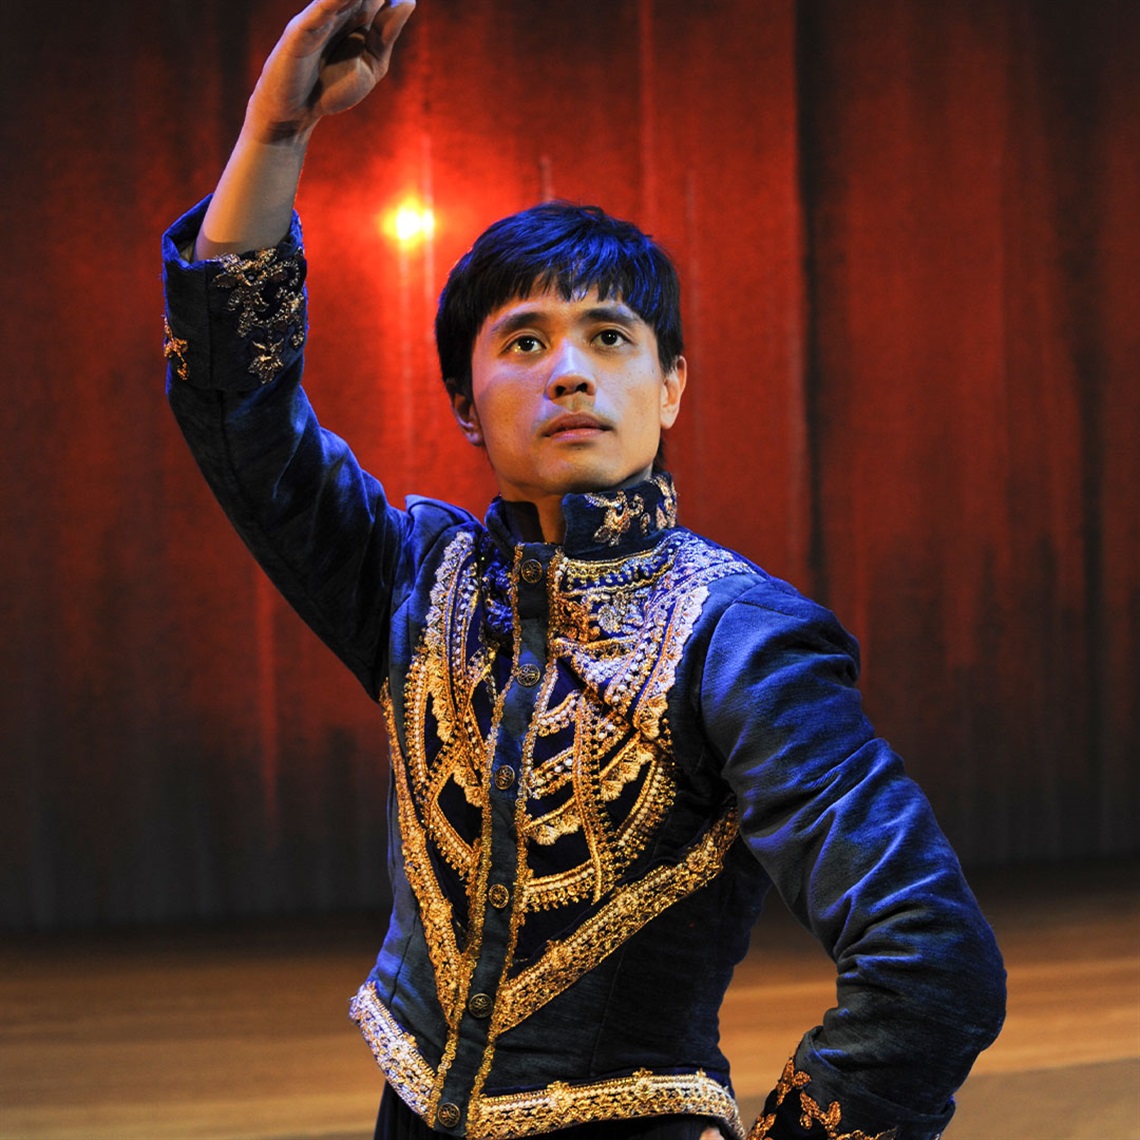 The Peasant Prince at the Shoalhaven Entertainment Centre